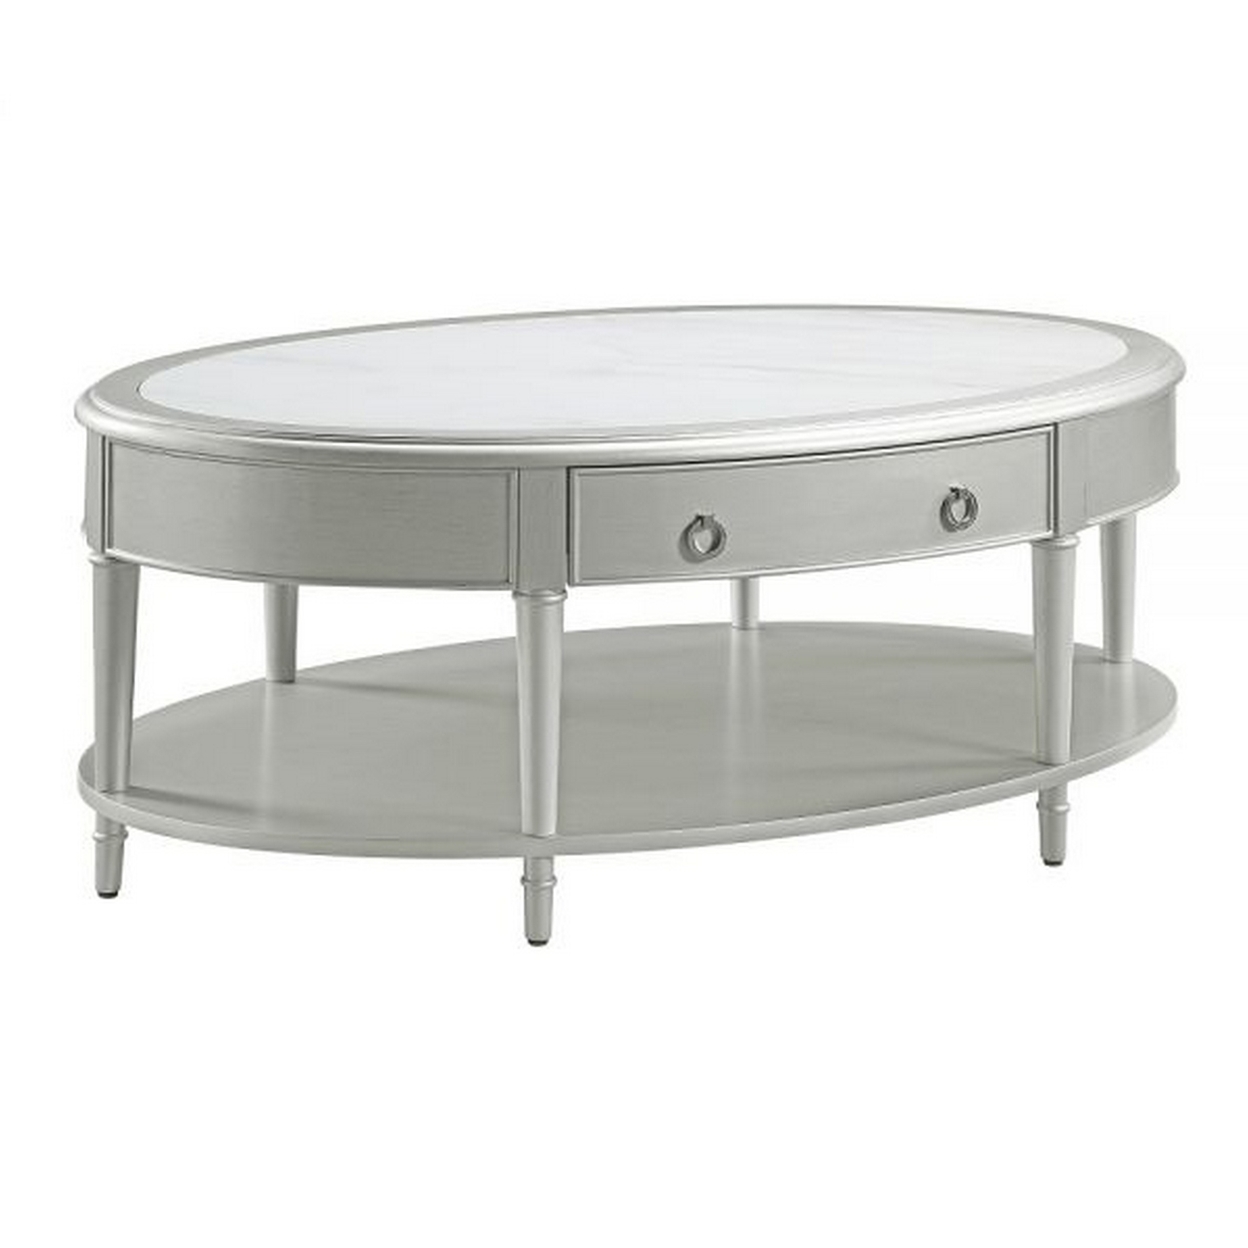 Kyna 50 Inch Coffee Table, Sintered Top, 1 Drawer, Classic Oval, Silver - Saltoro Sherpi